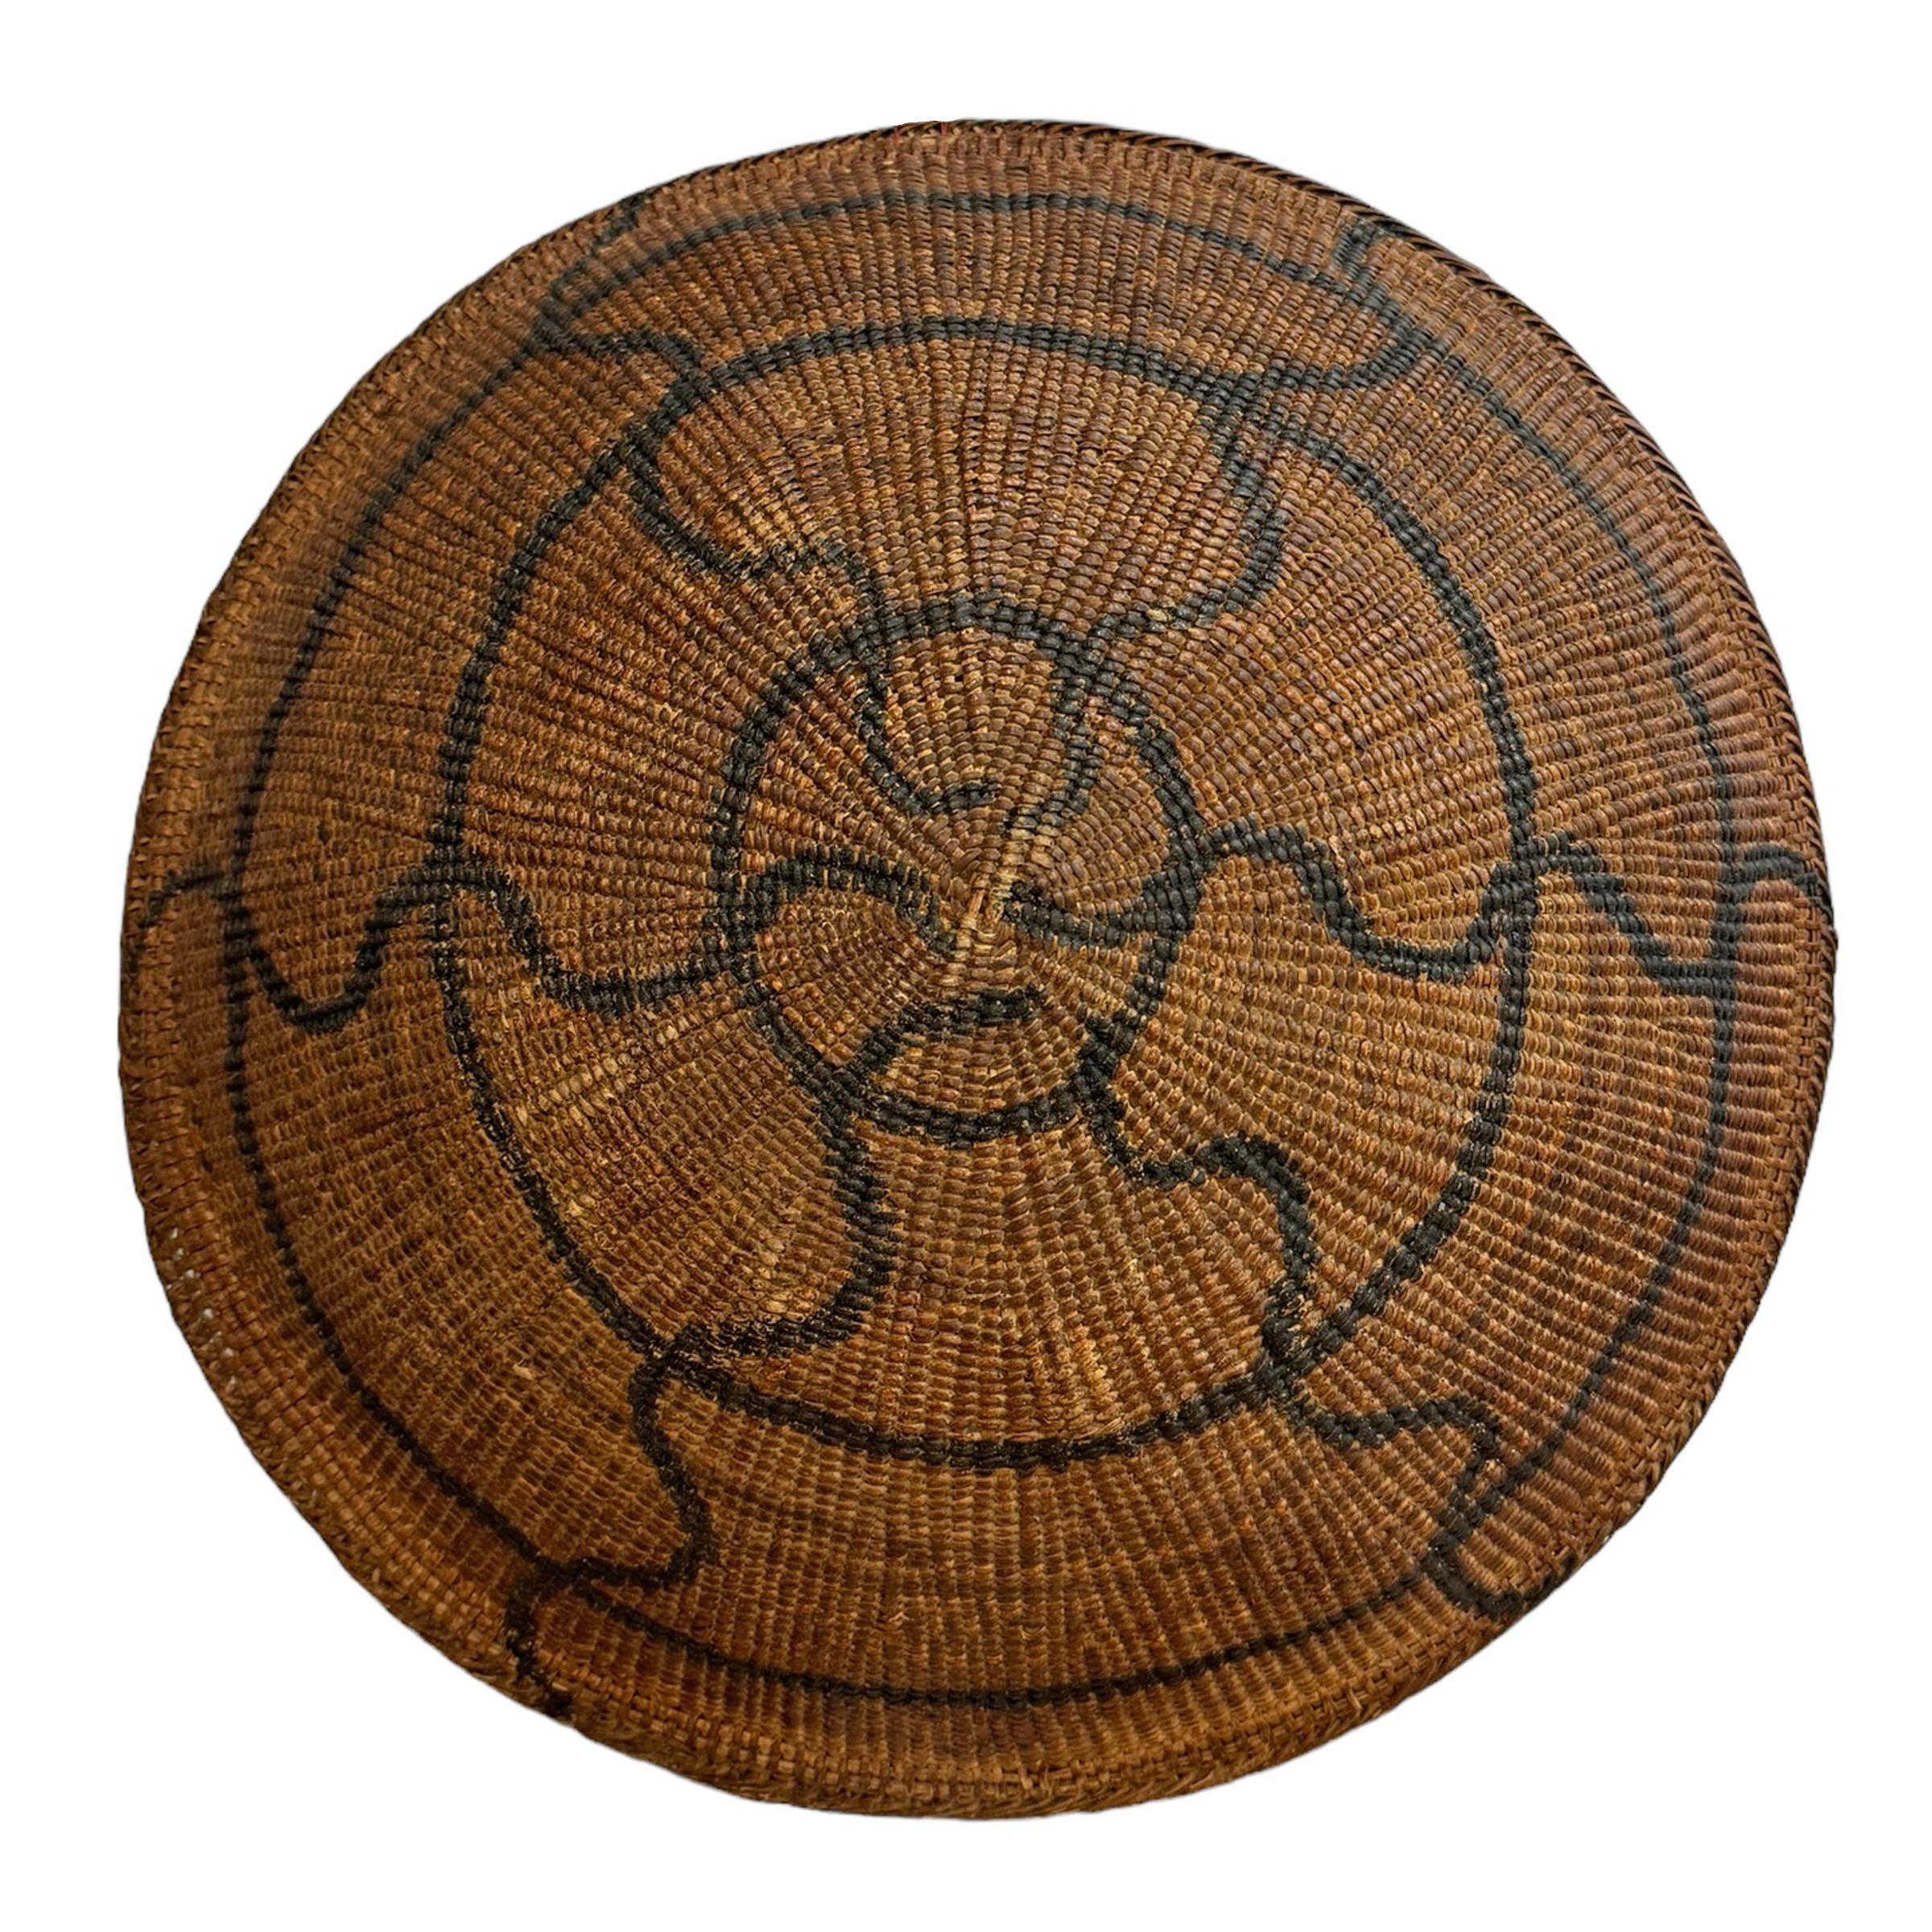 Tribal Collection of Seven 20th Century Yanomami Baskets